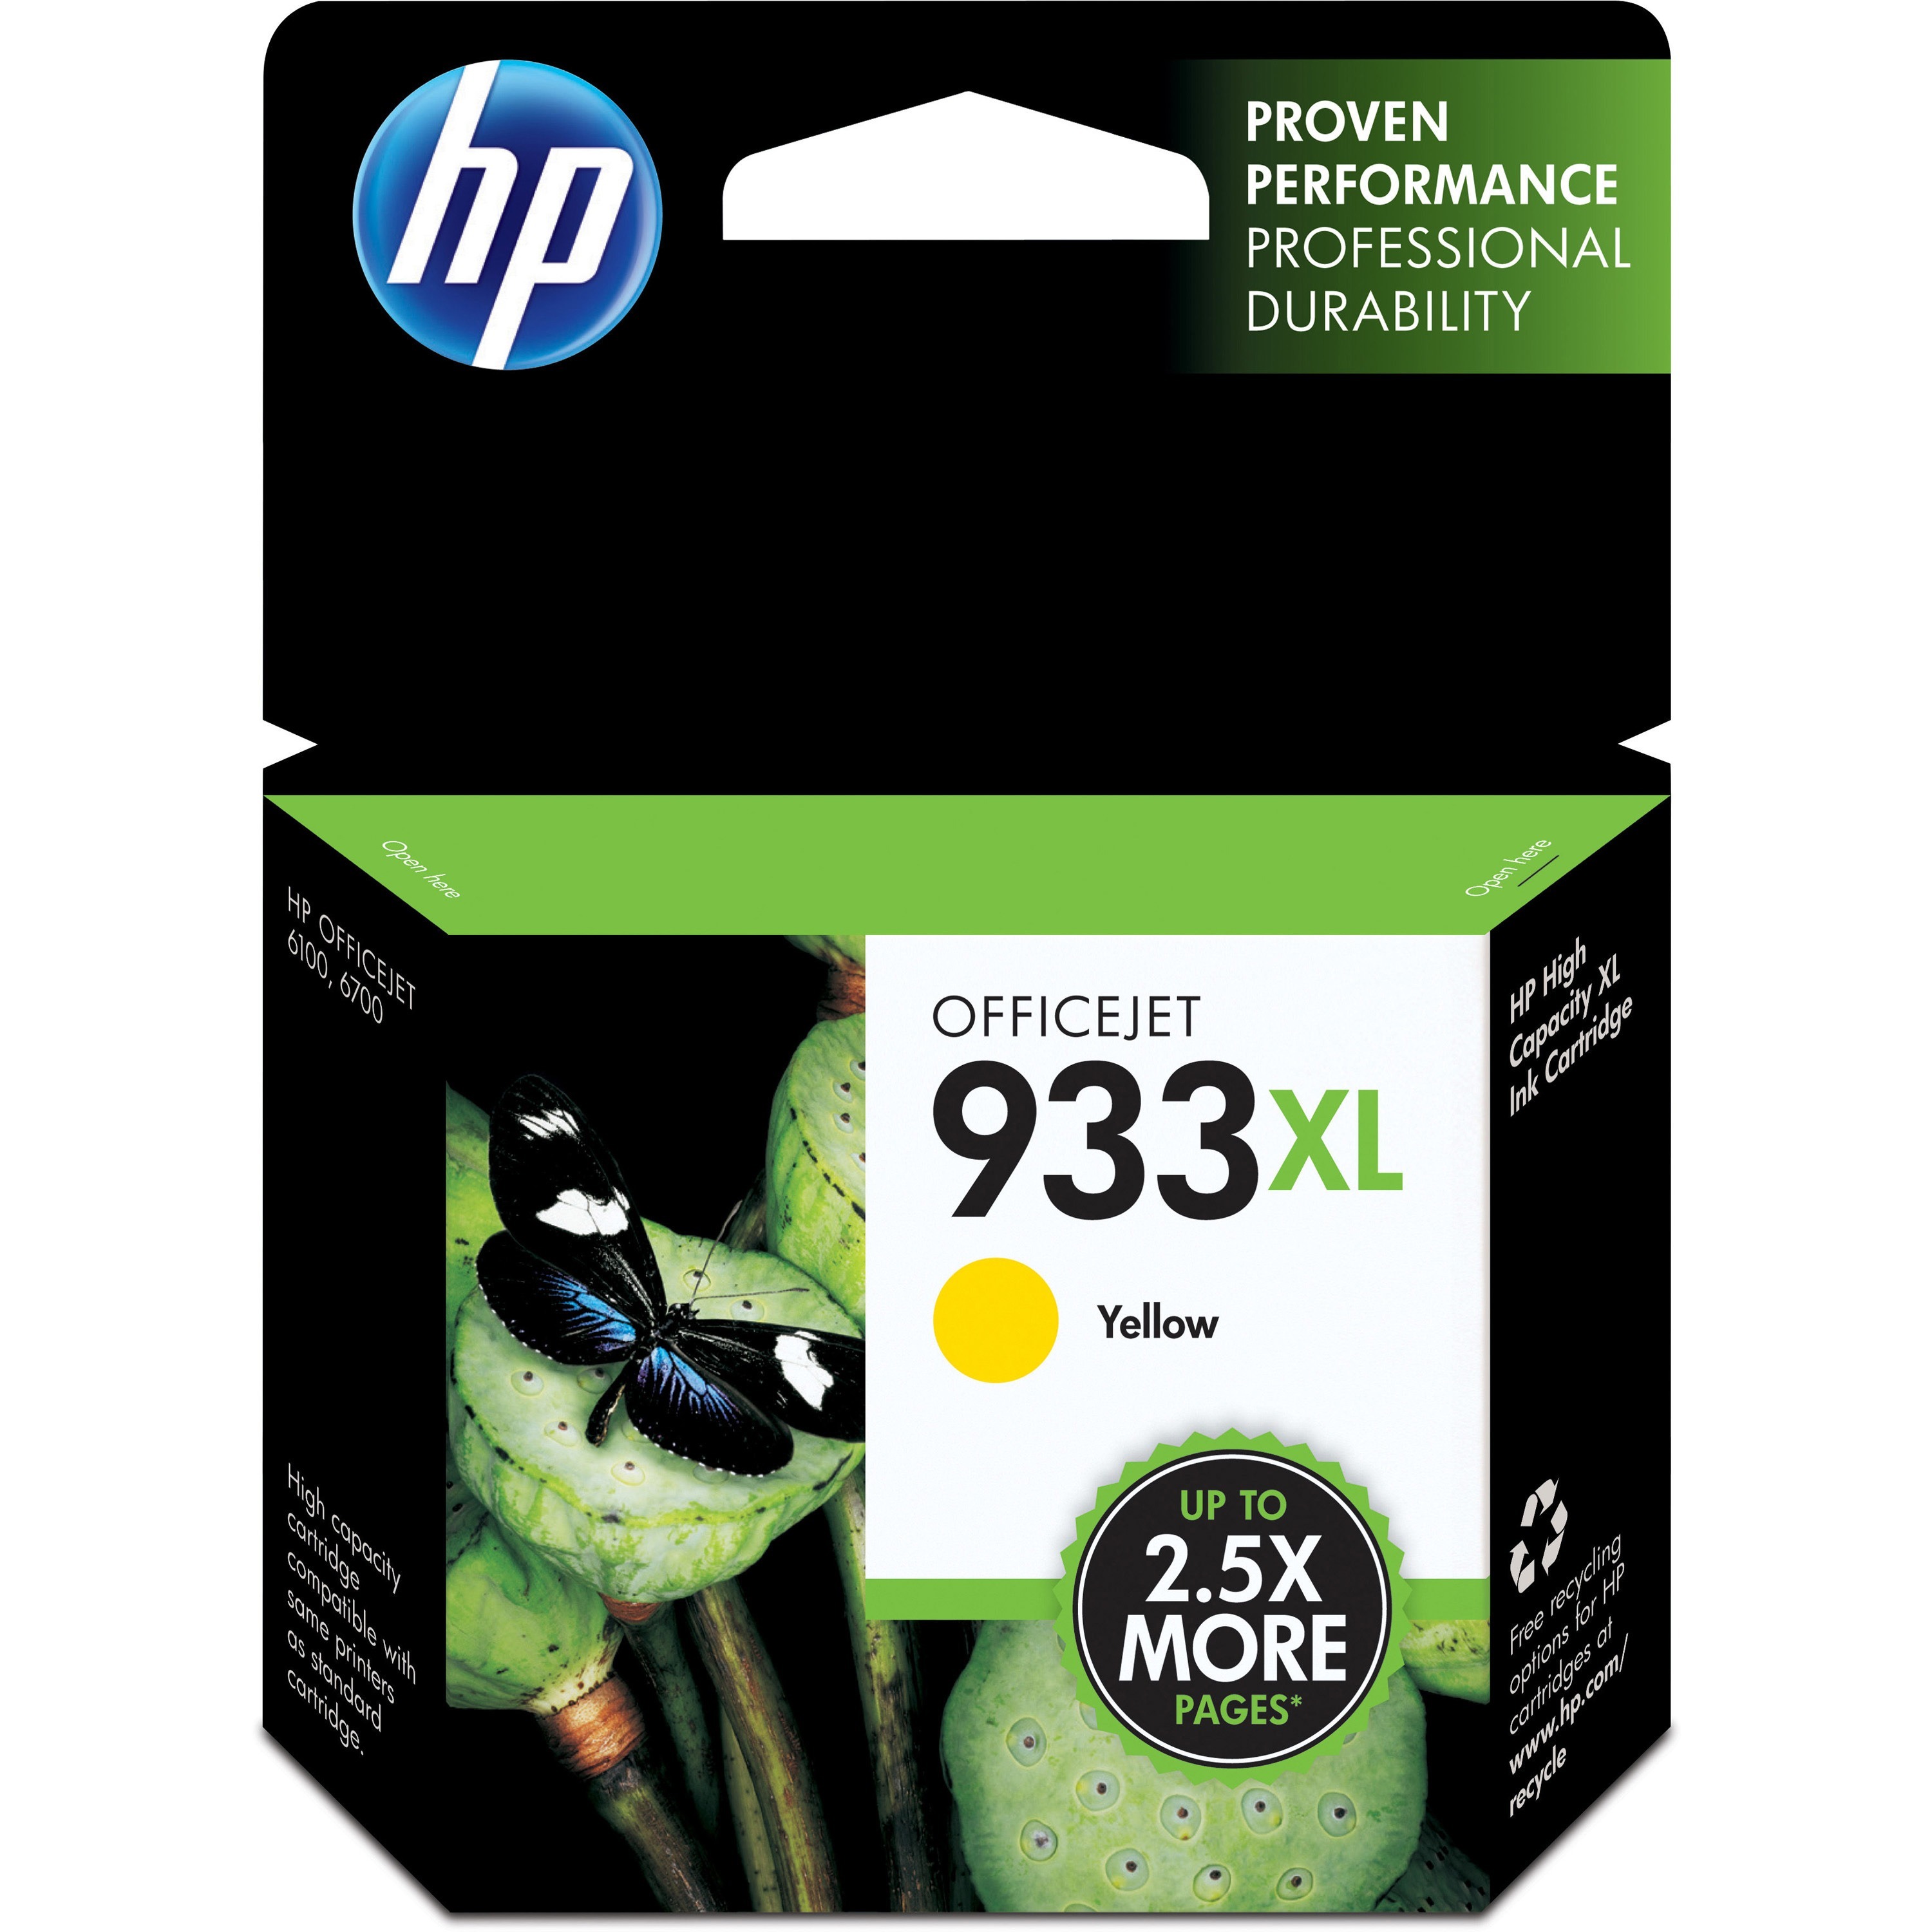 HP Papers BrightWhite24 Office Paper - White - 100 Brightness